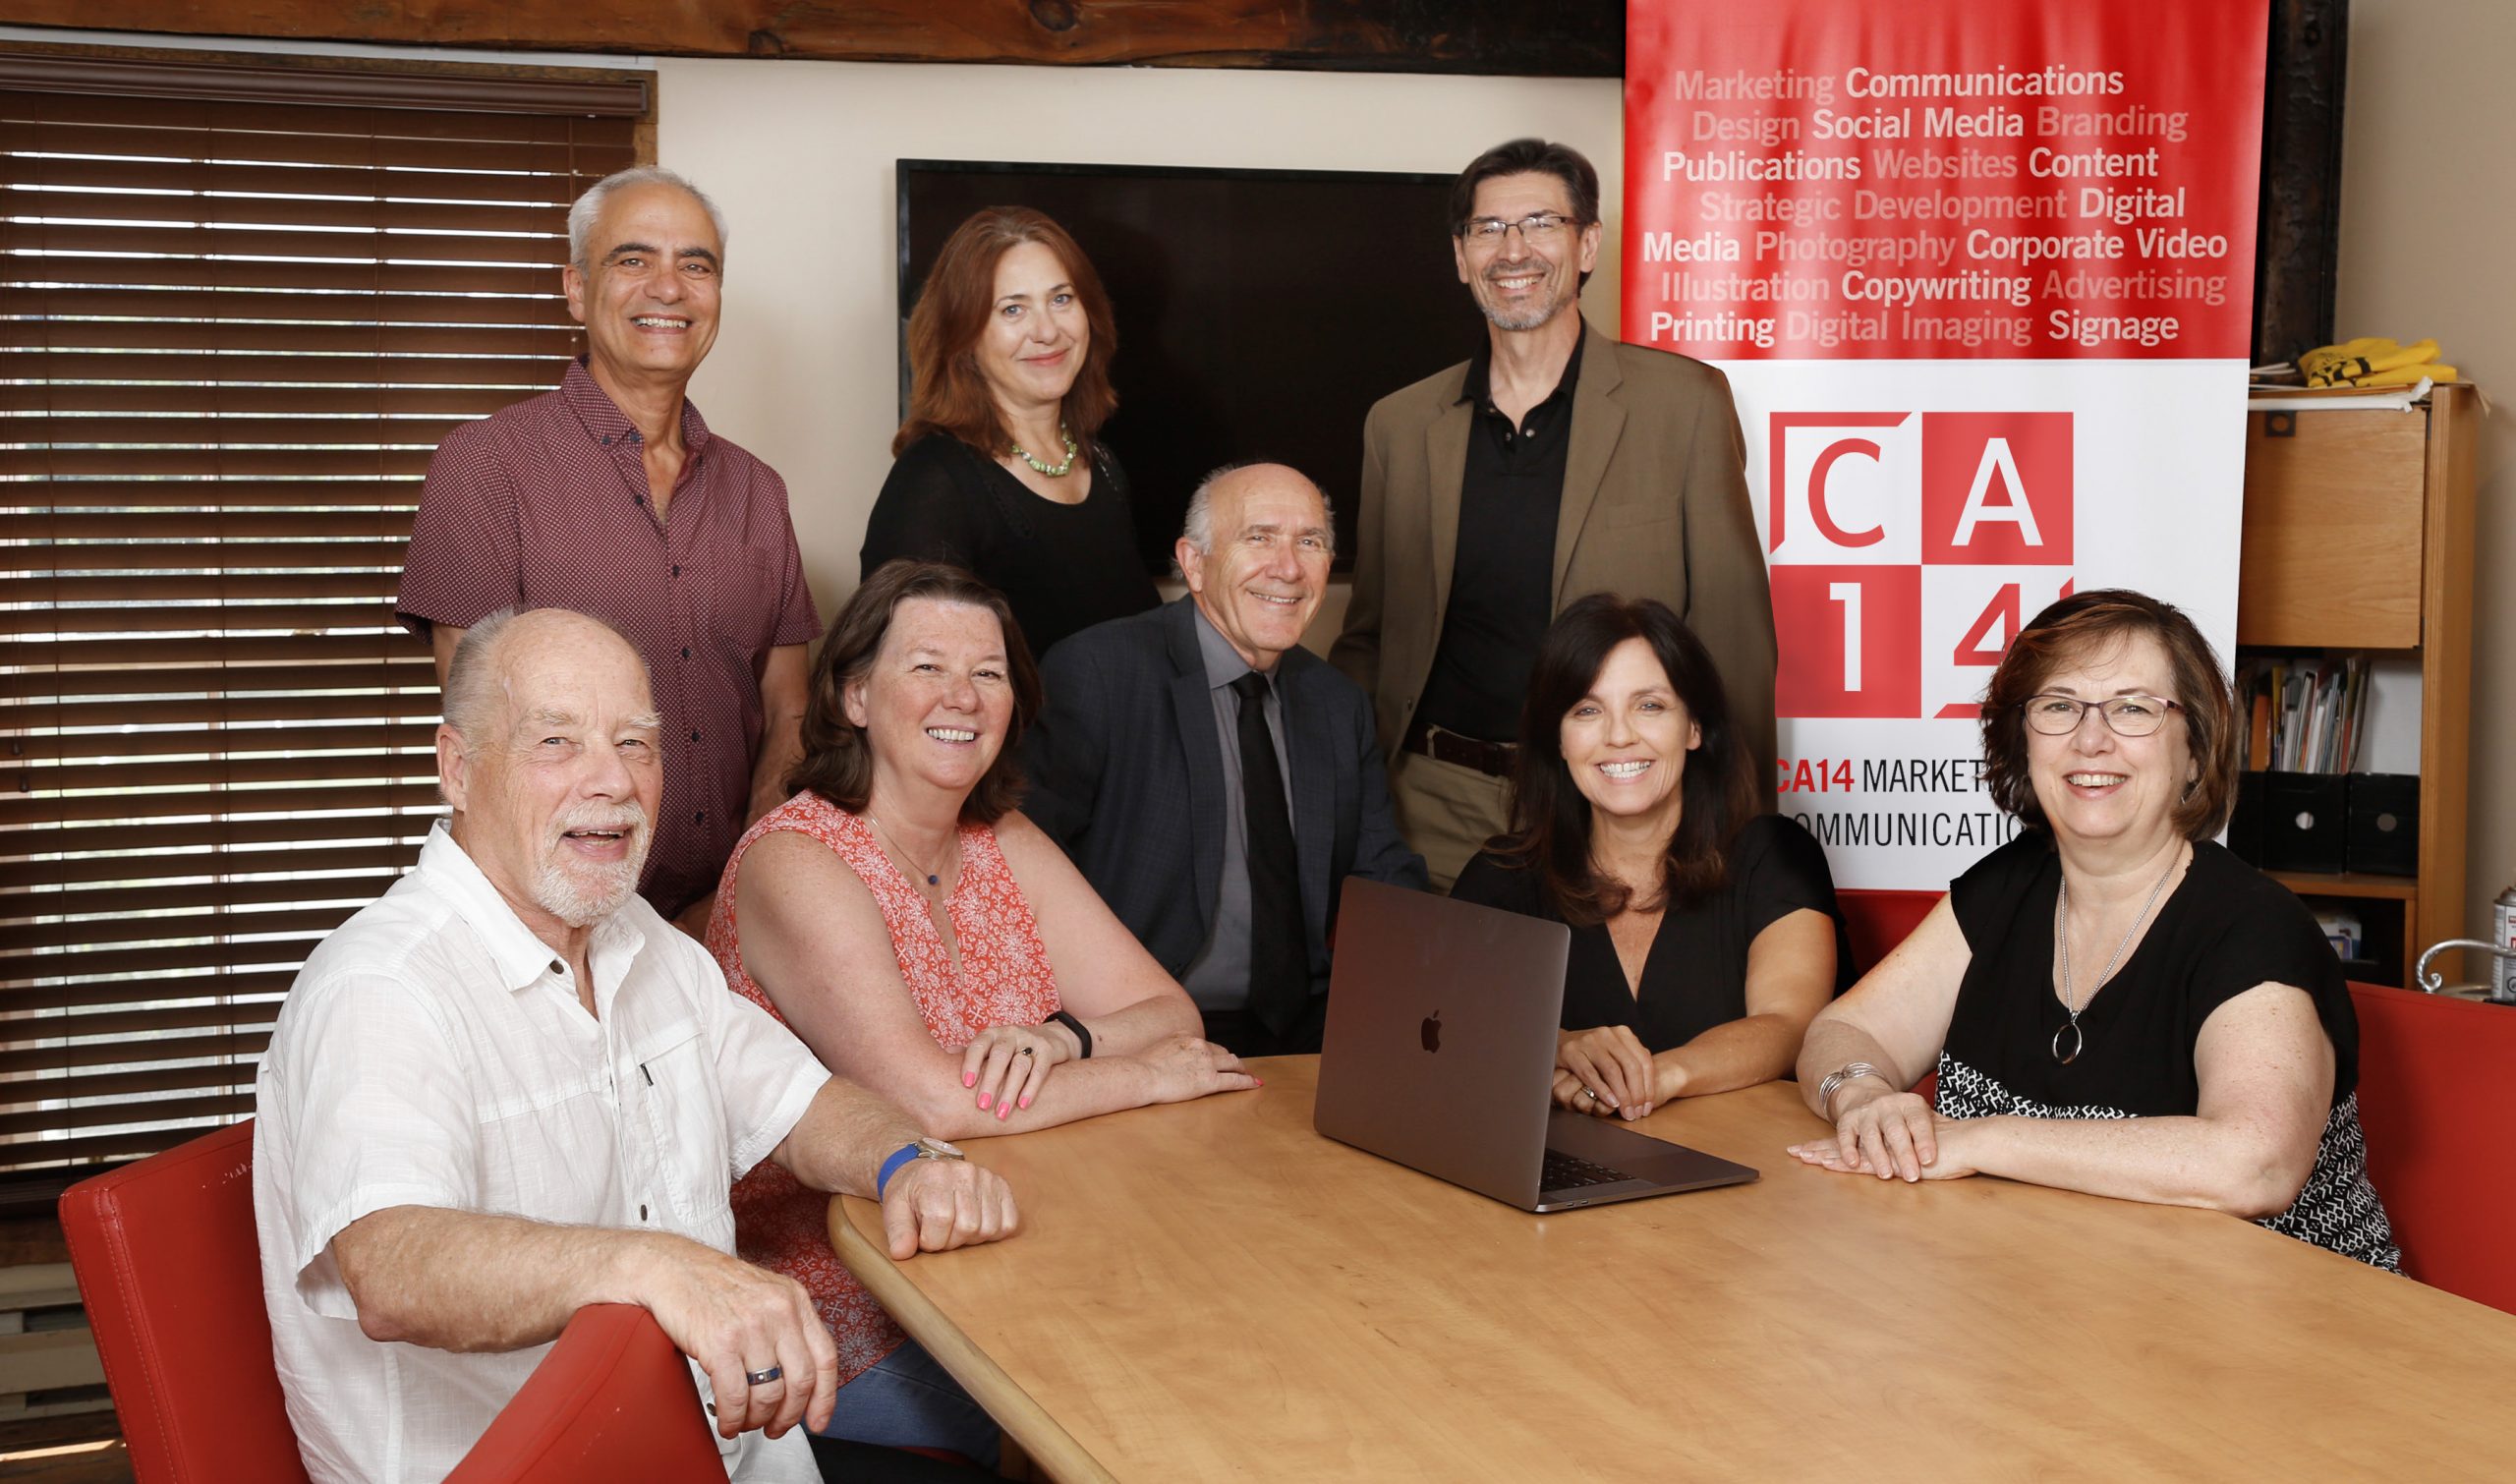 CA14 team sitting at a board table with a screen behind them on the wall and a pull up marketing banner on display.